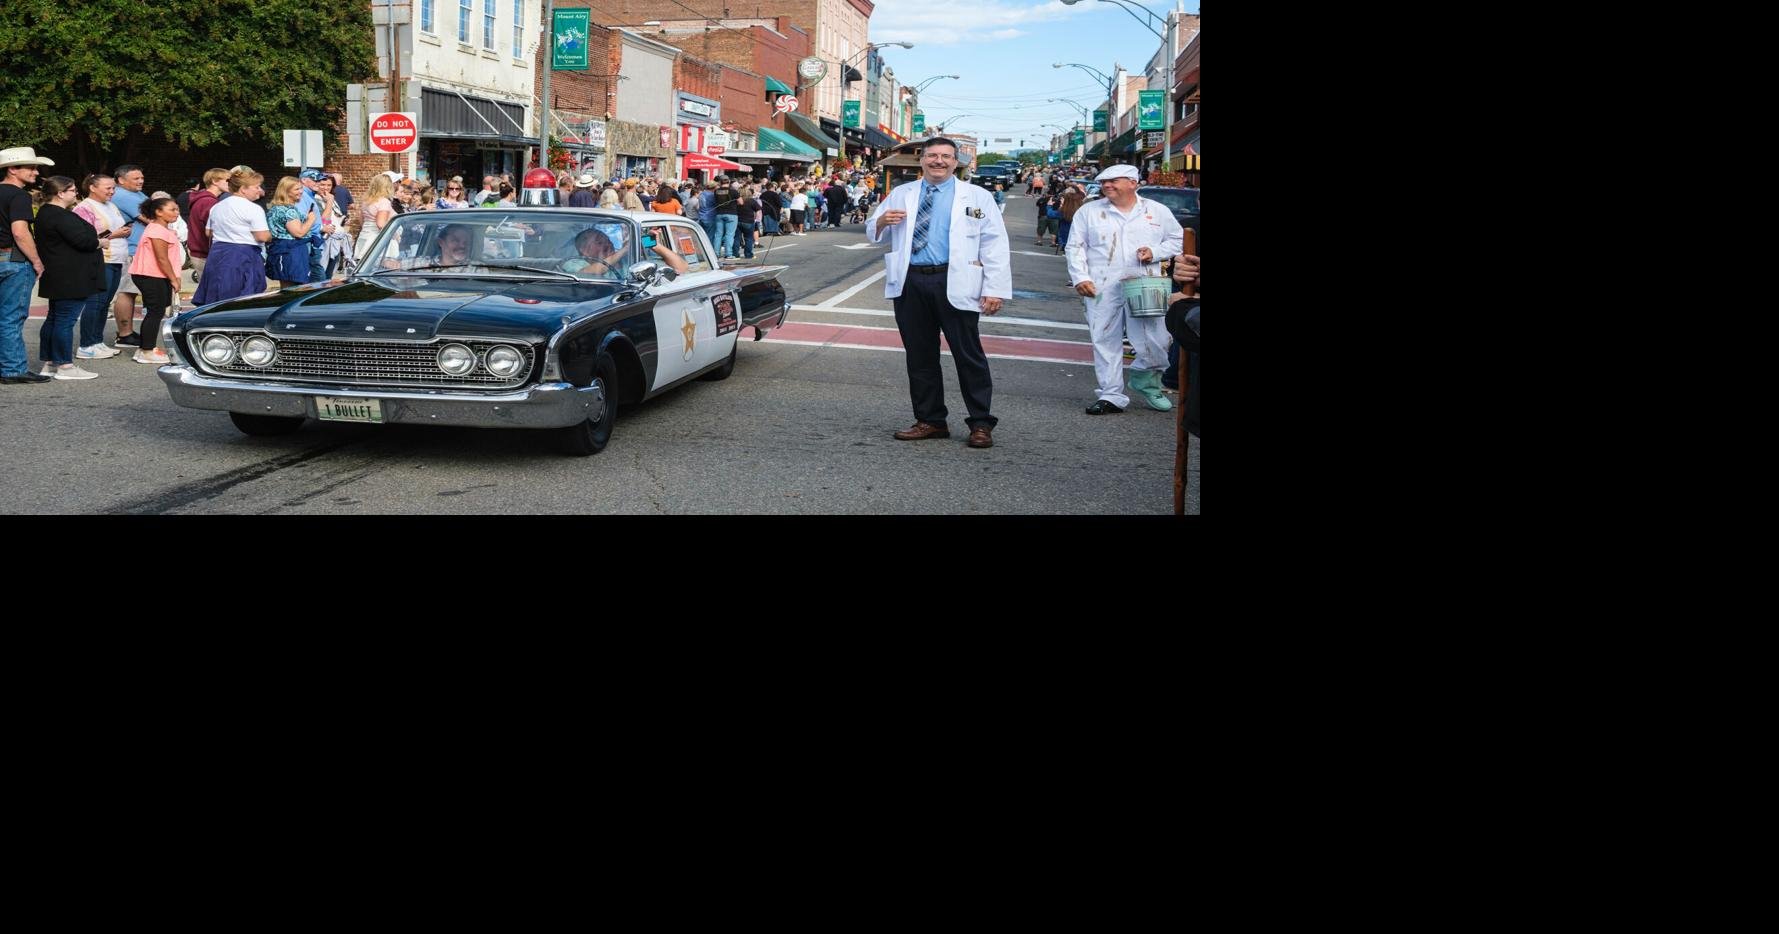 Here's the schedule for Mayberry Days in Mount Airy, N.C.